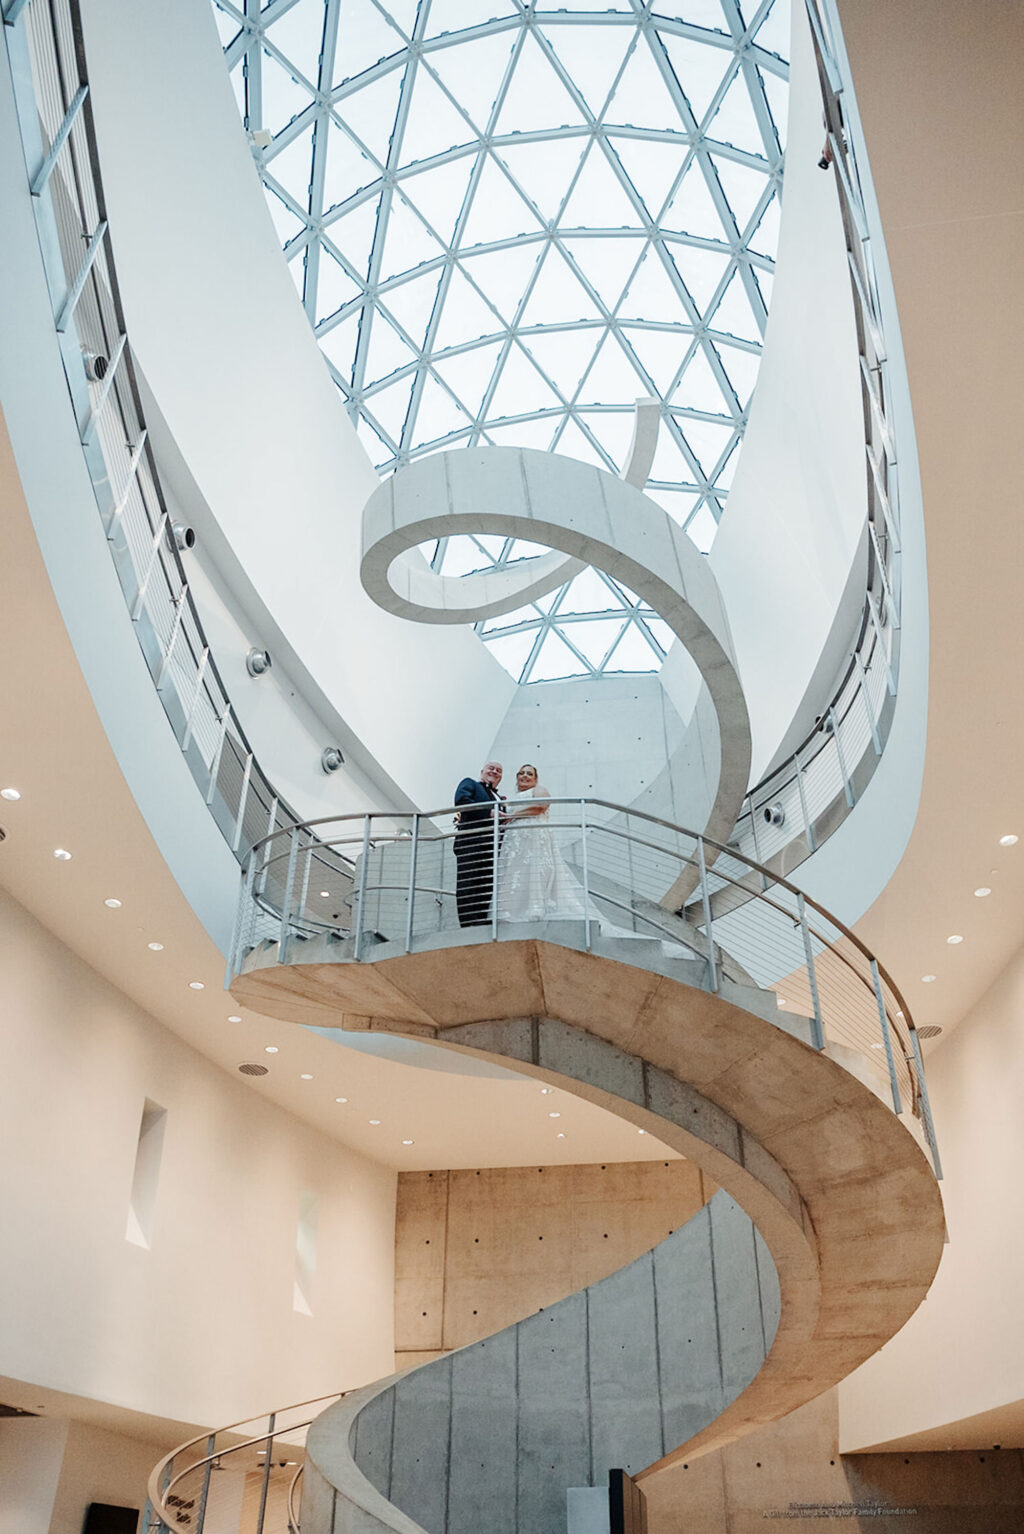 Bride and Groom on a Staircase Wedding Portrait | St Petersburg Venue Dali Museum | Planner UNIQUE Weddings & Events